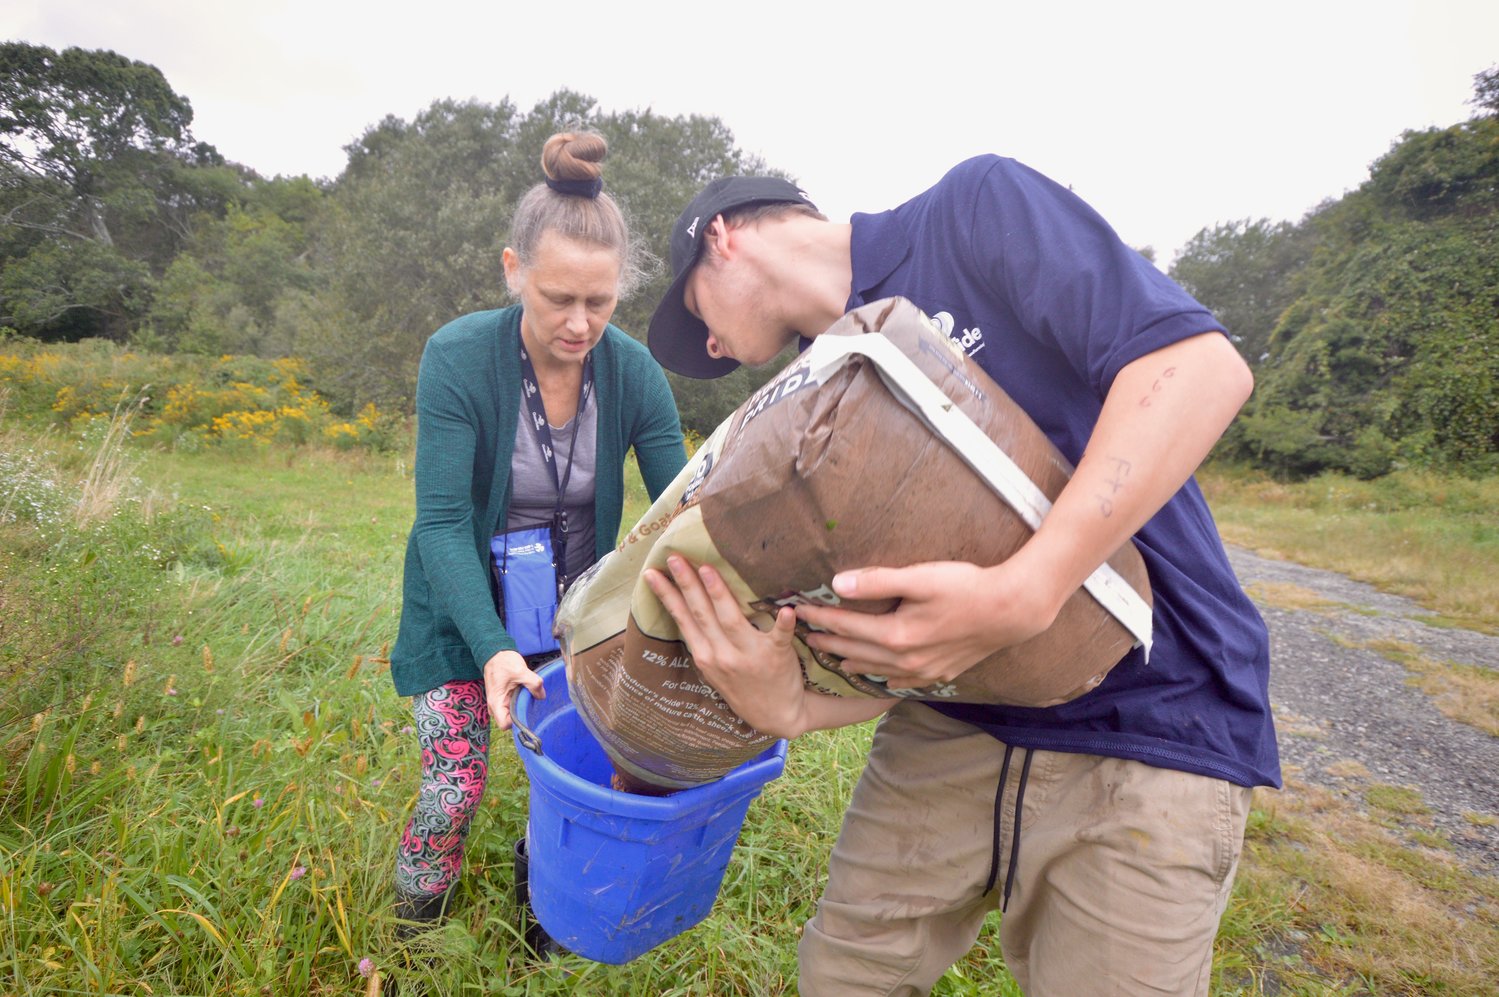 Susan Vogl, director of social services at Ocean Tides School, holds a bucket as one of her students, Chris, pours a mix of feed and molasses to entice the cattle at Cloverbud Ranch.